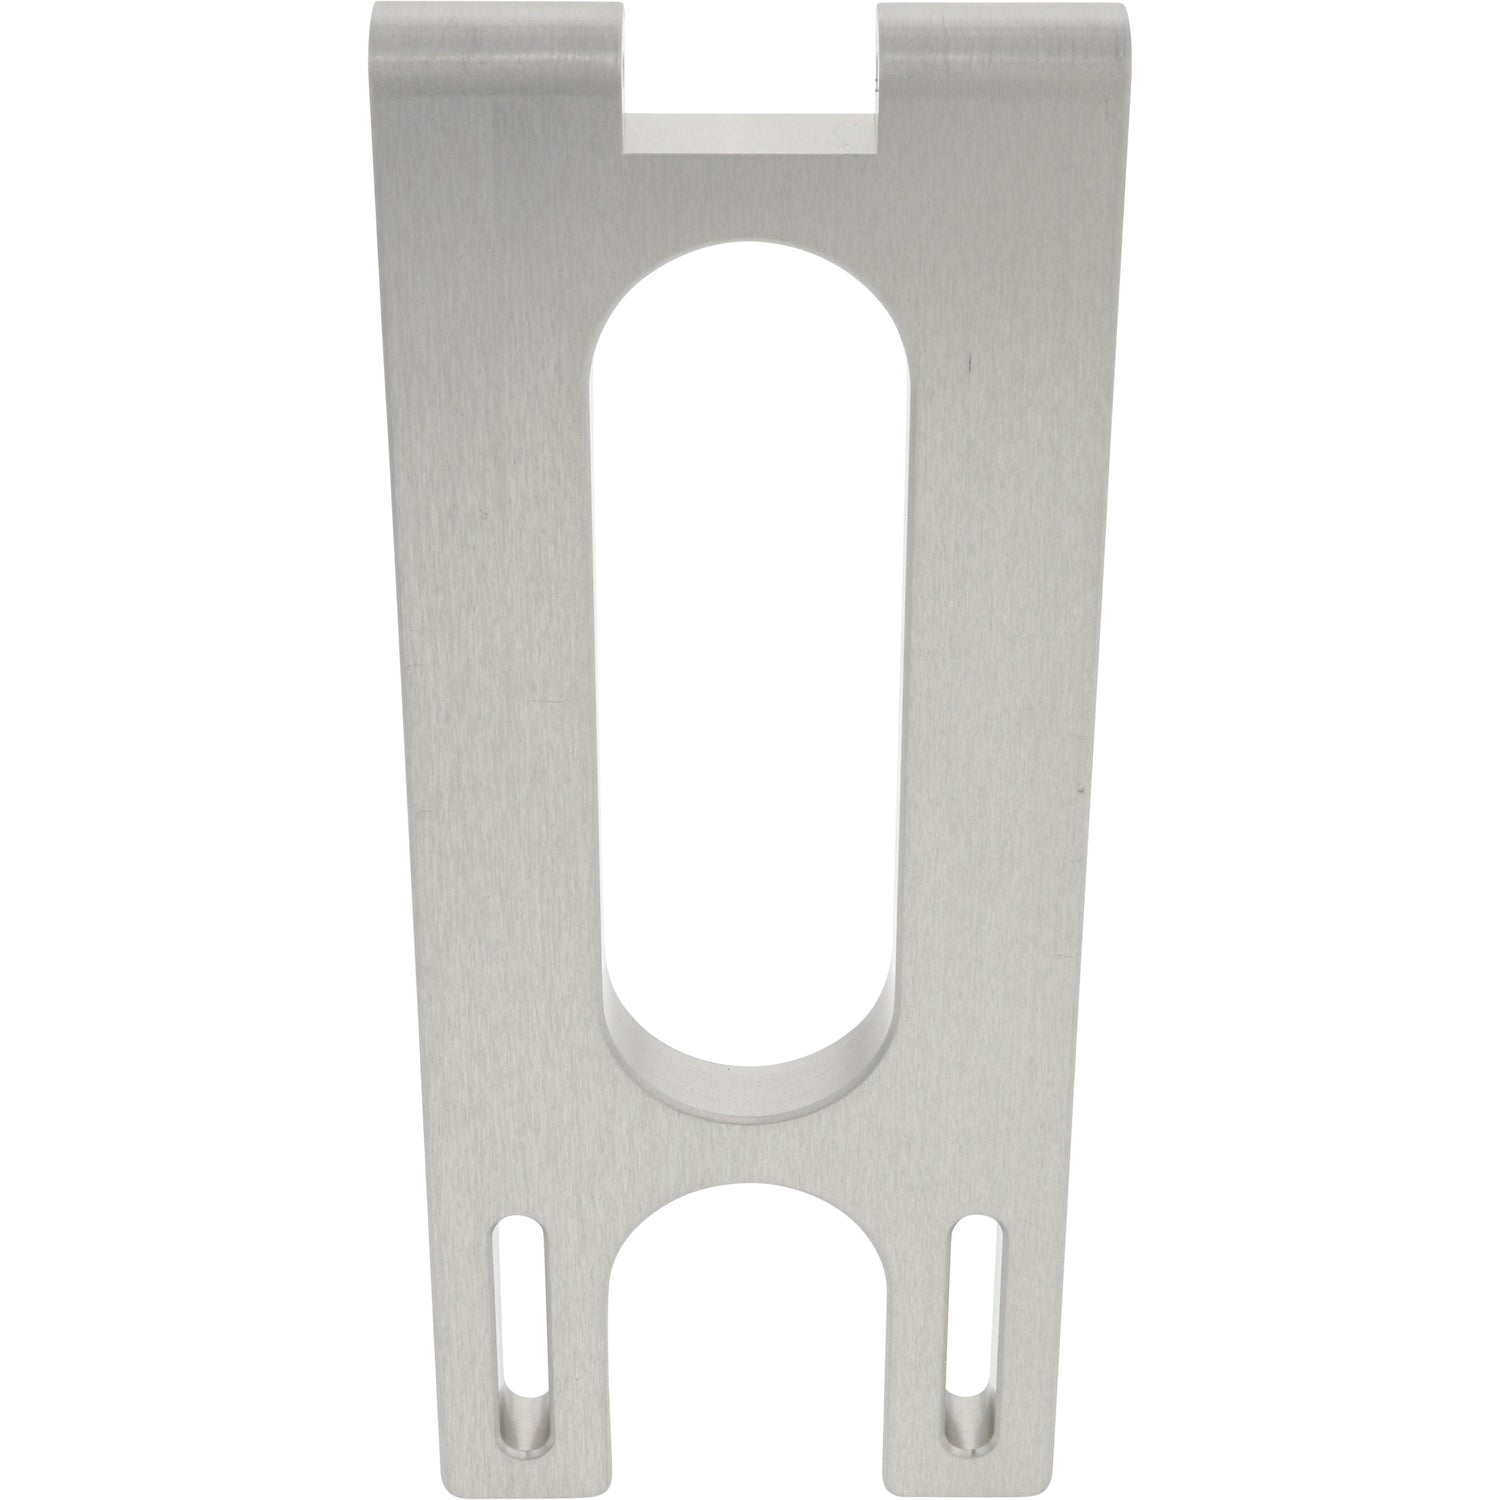 NEEDS REVISION - Lidless Can Hinge Brackets